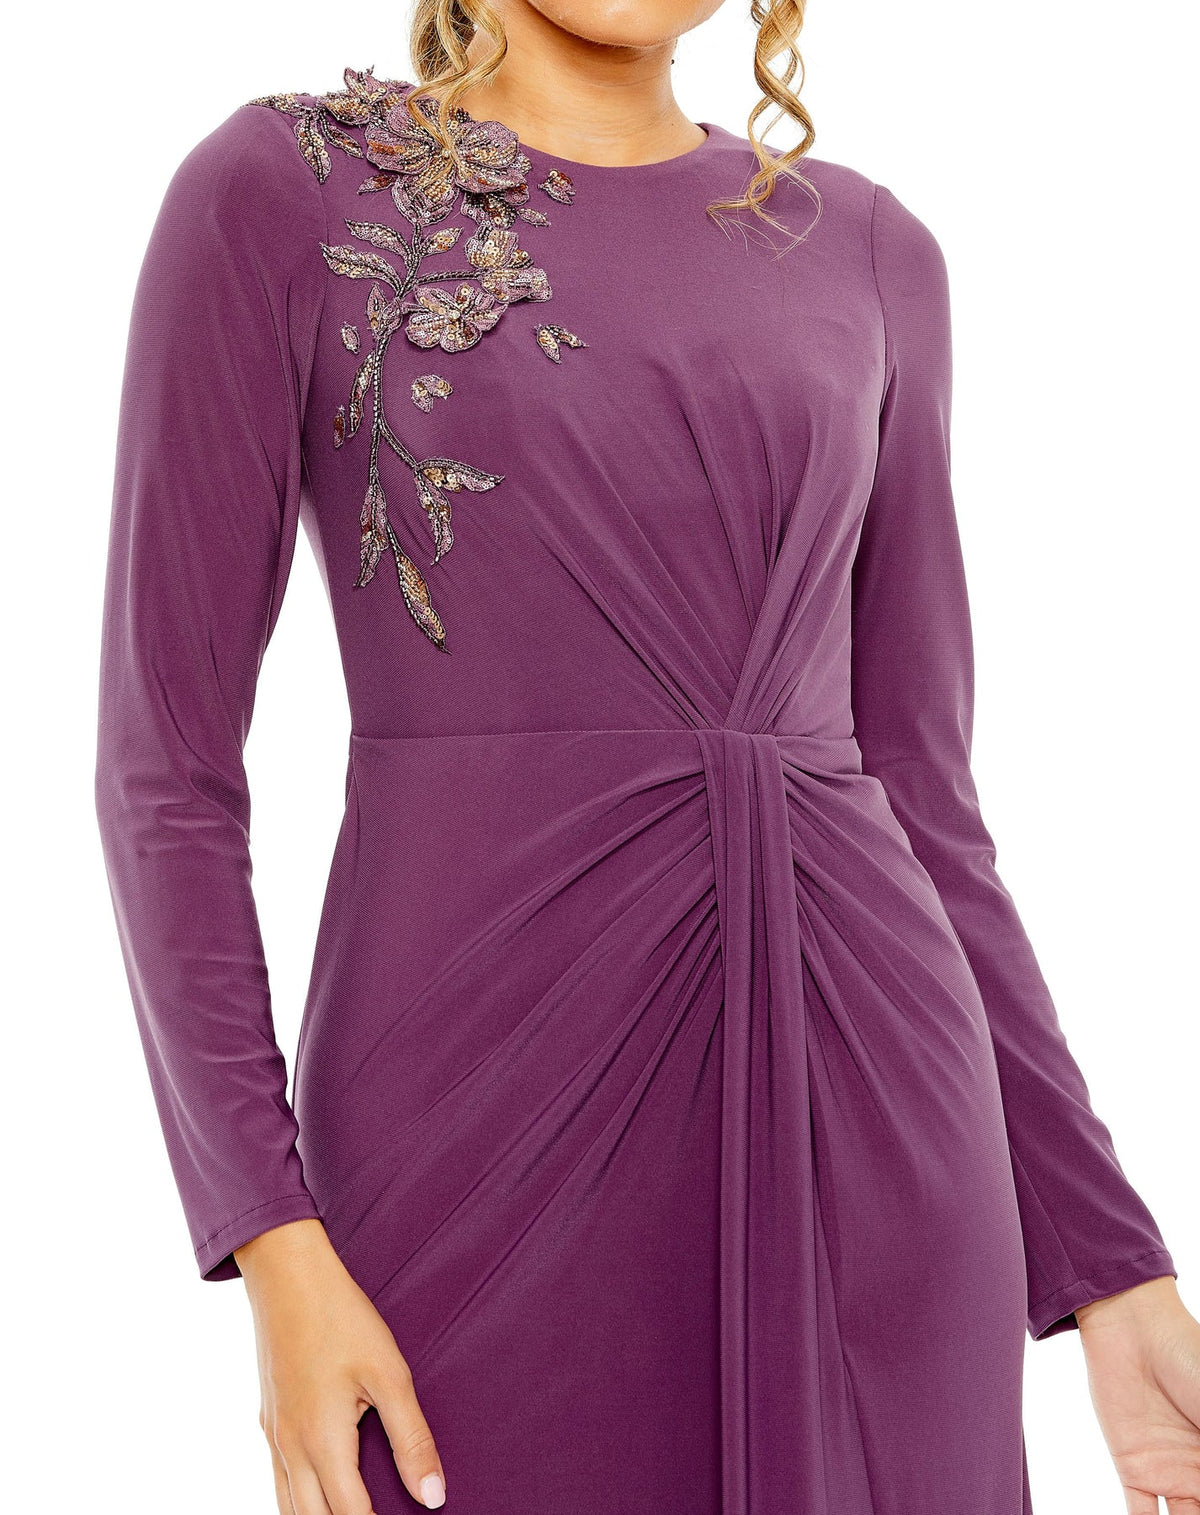 High neck long sleeve embellished gown - Purple